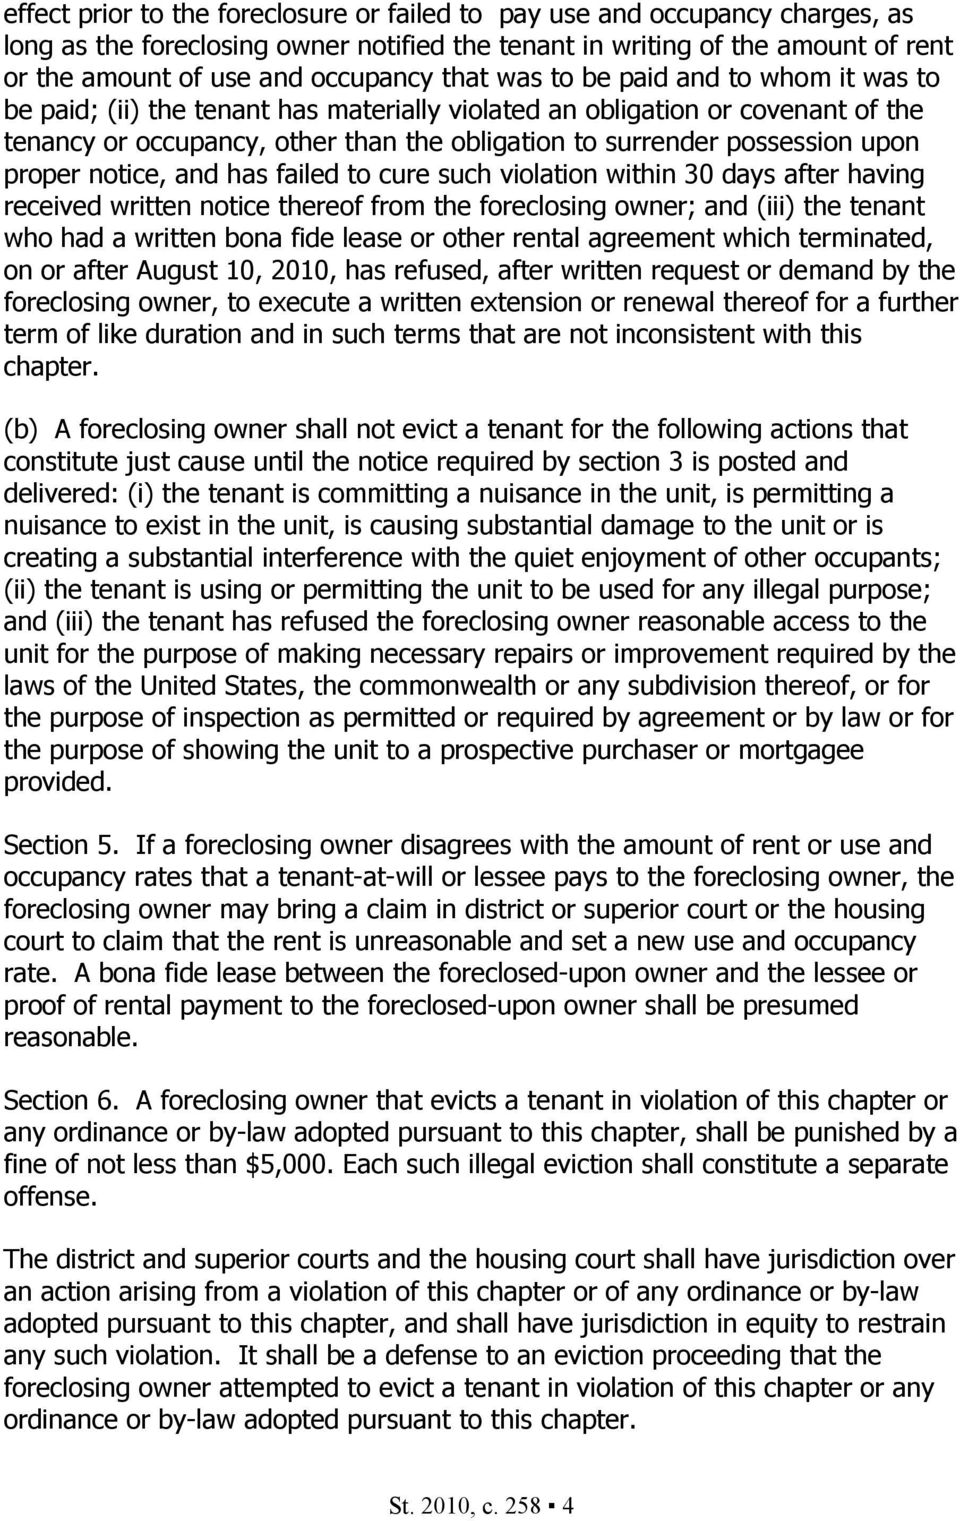 upon proper notice, and has failed to cure such violation within 30 days after having received written notice thereof from the foreclosing owner; and (iii) the tenant who had a written bona fide